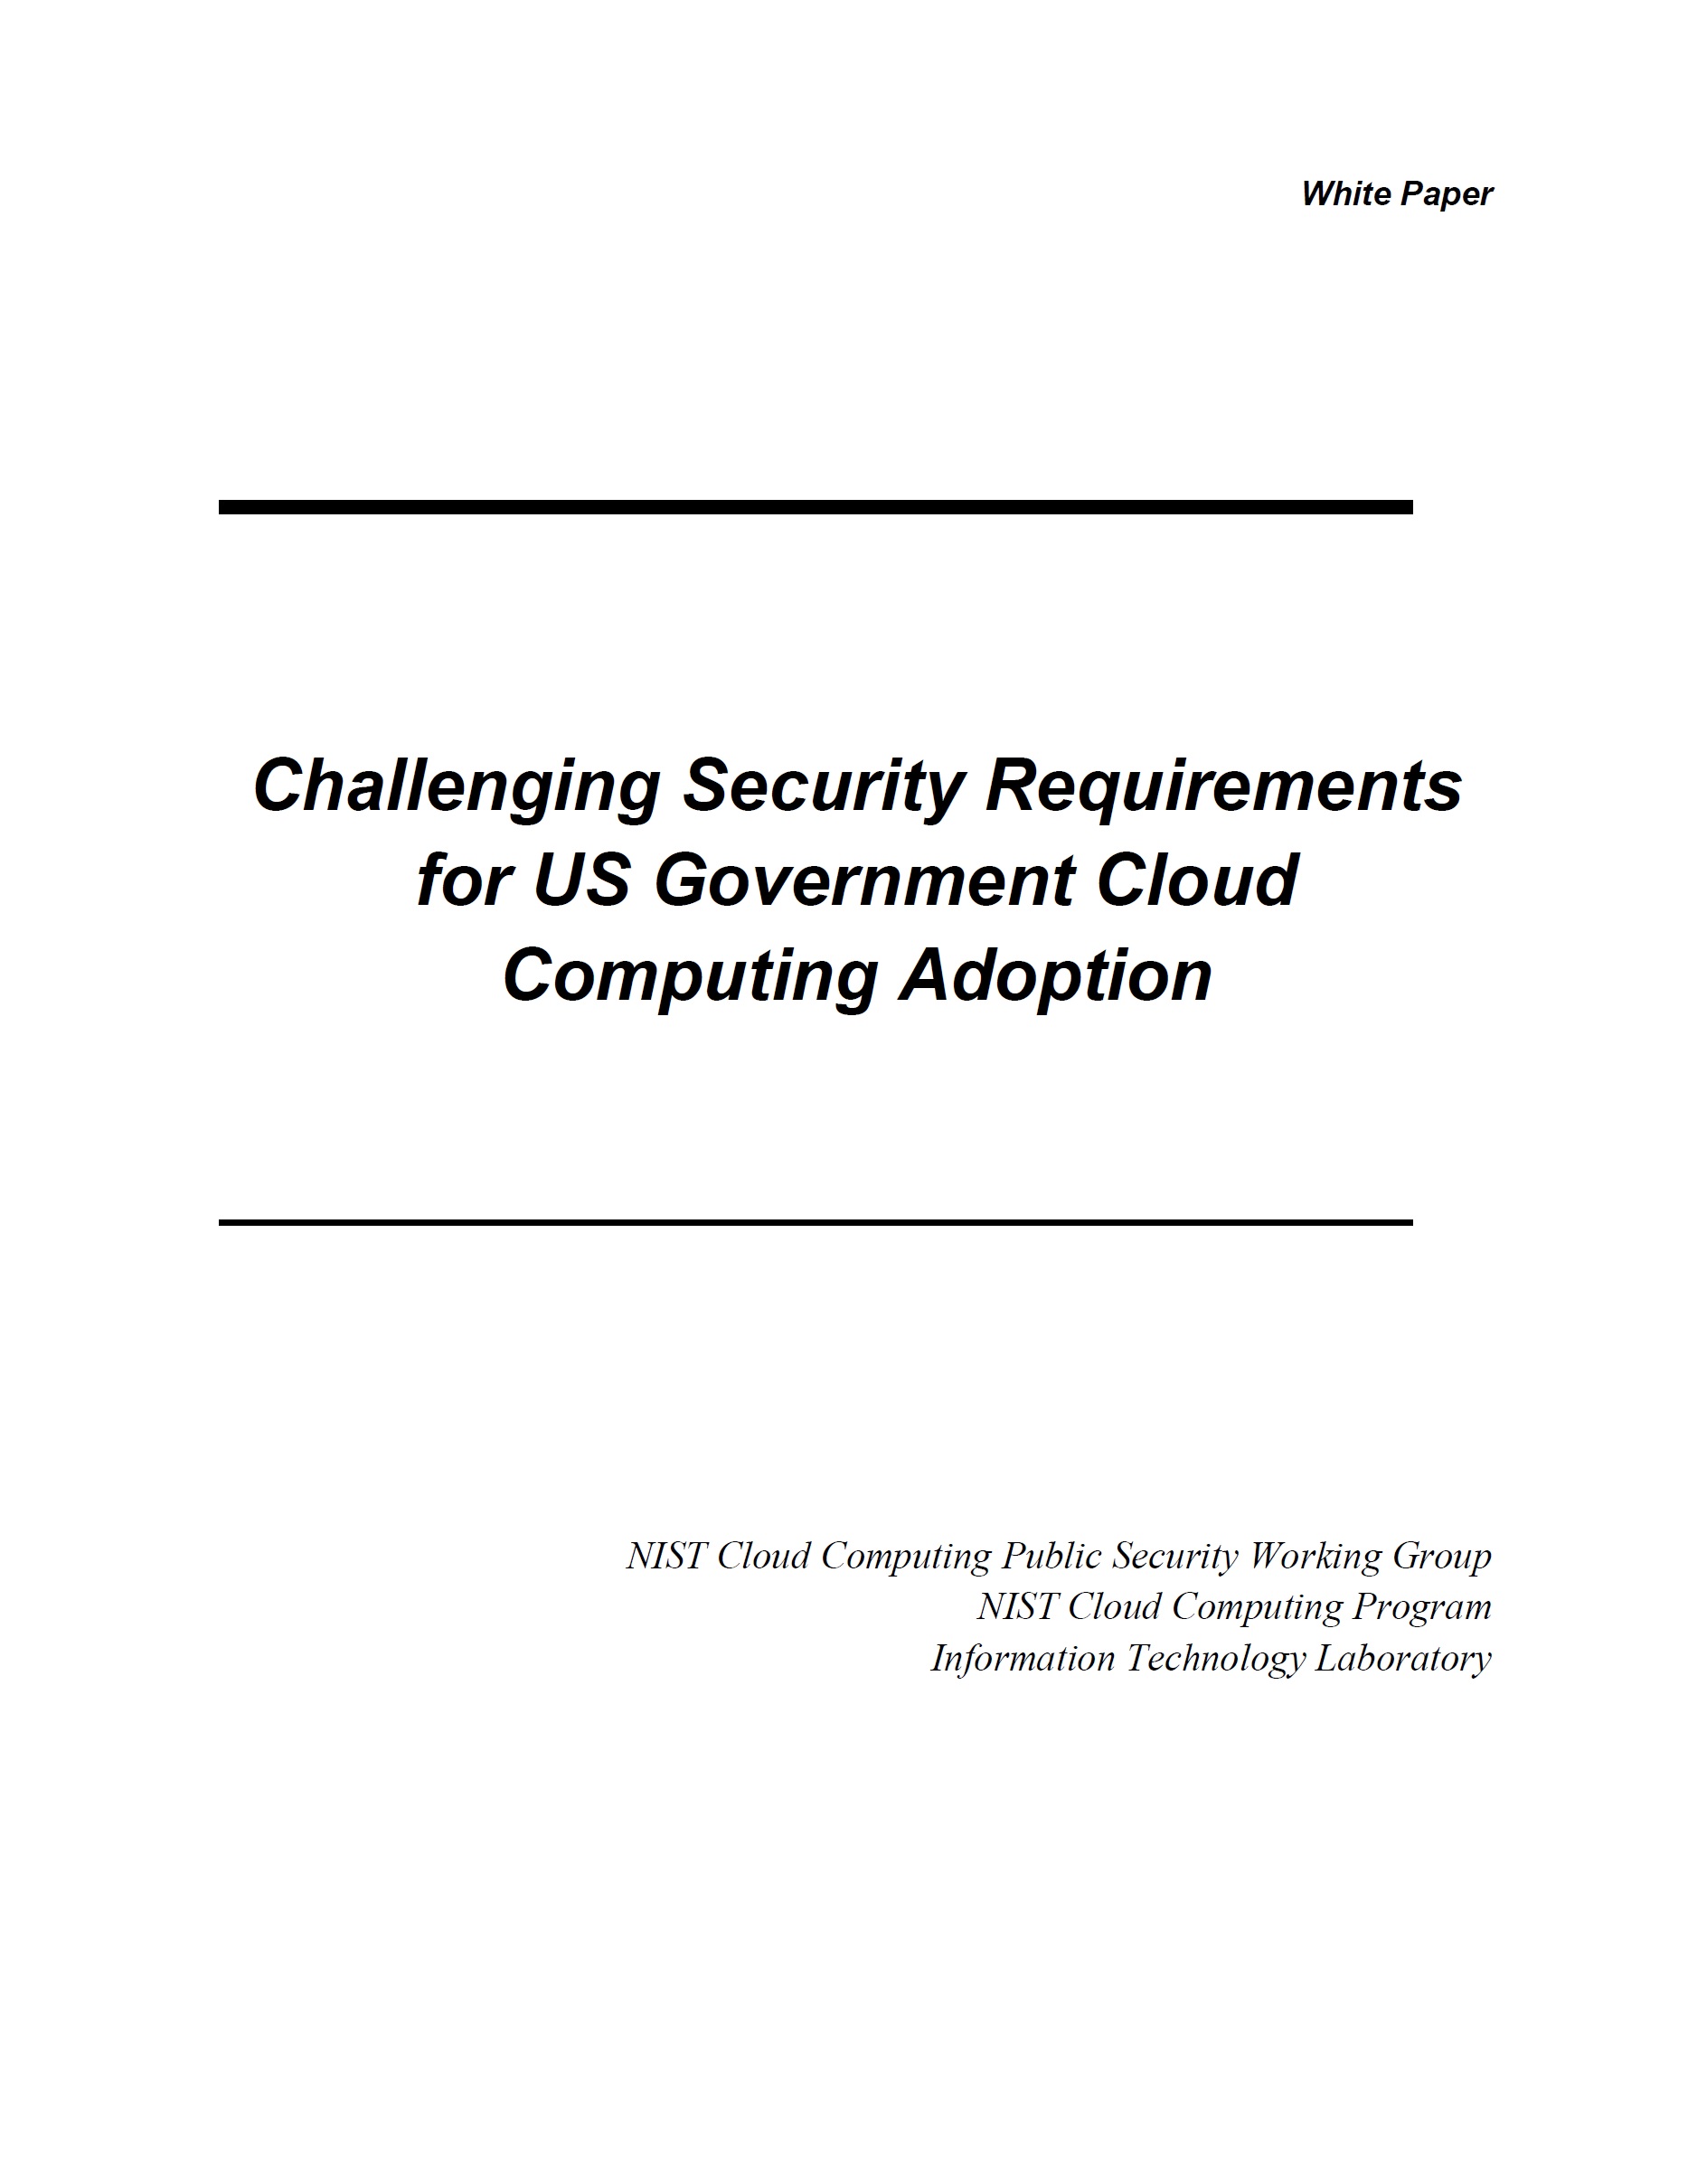 Challenging Security Requirements for US Government Cloud Computing Adoption – NIST